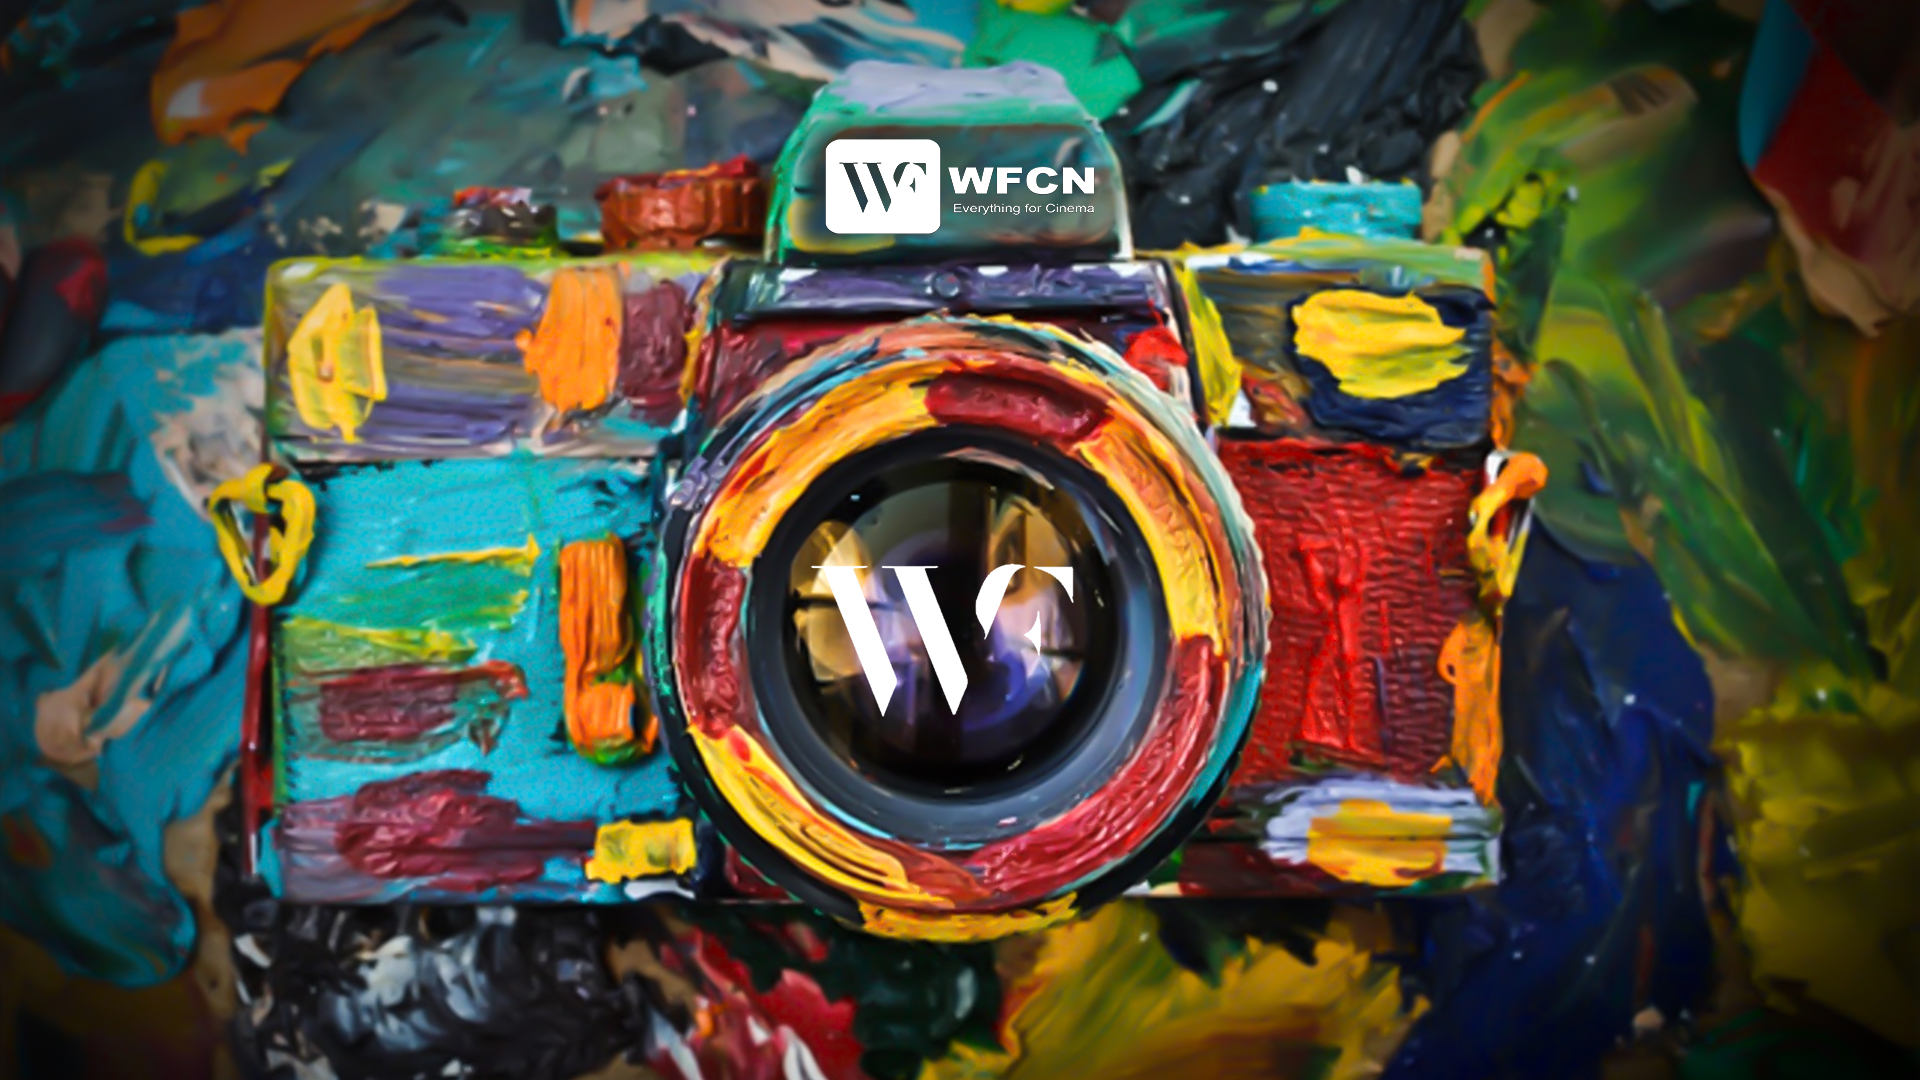 WFCN - An Avant-garde Platform Exclusively For Film Industry Professionals